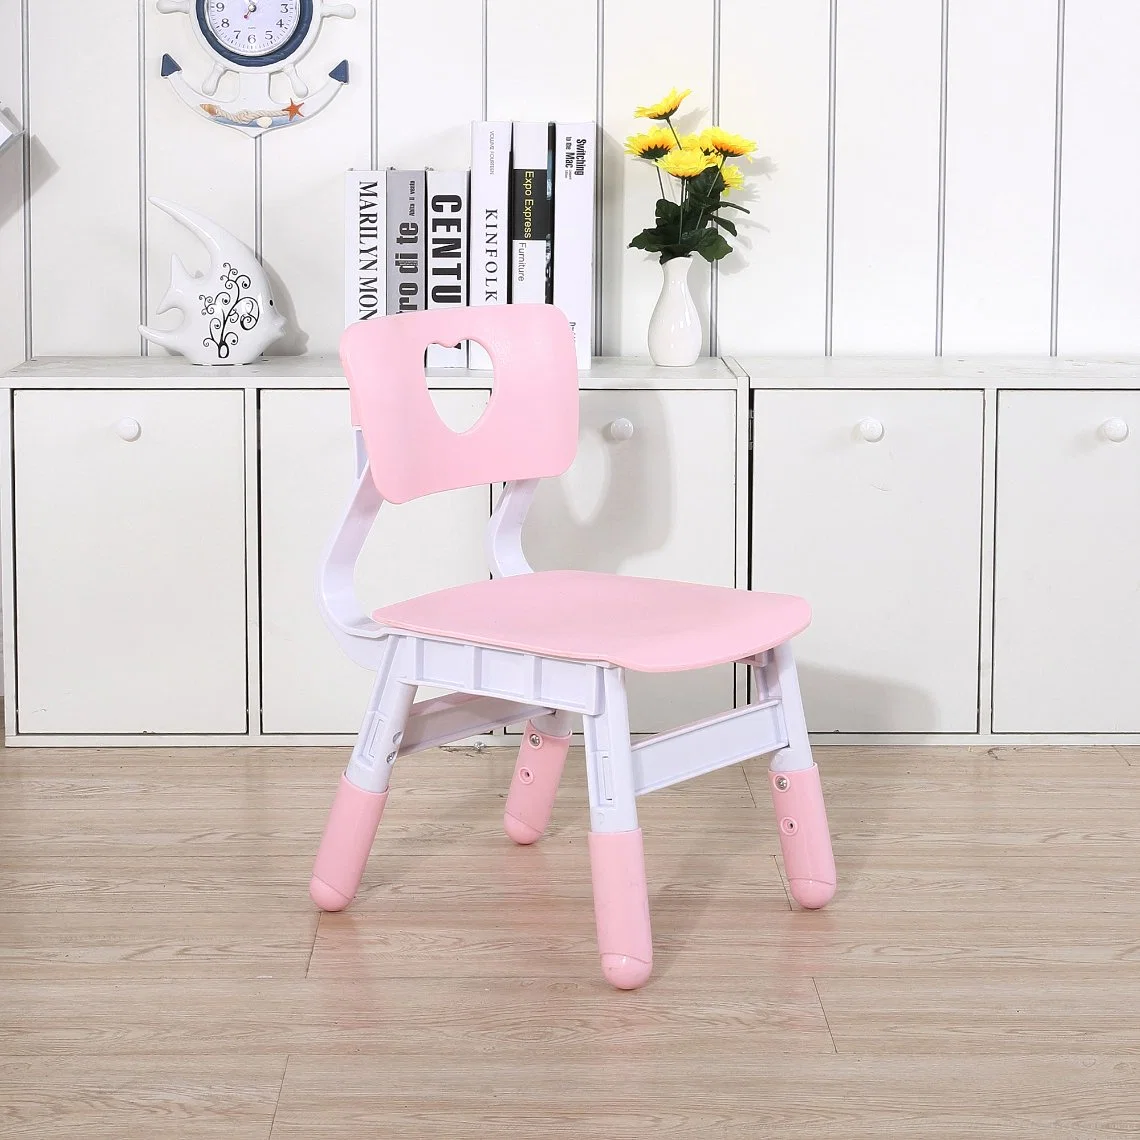 Children Learning Plastic Table Kindergarten Furniture Kids Table and Chair